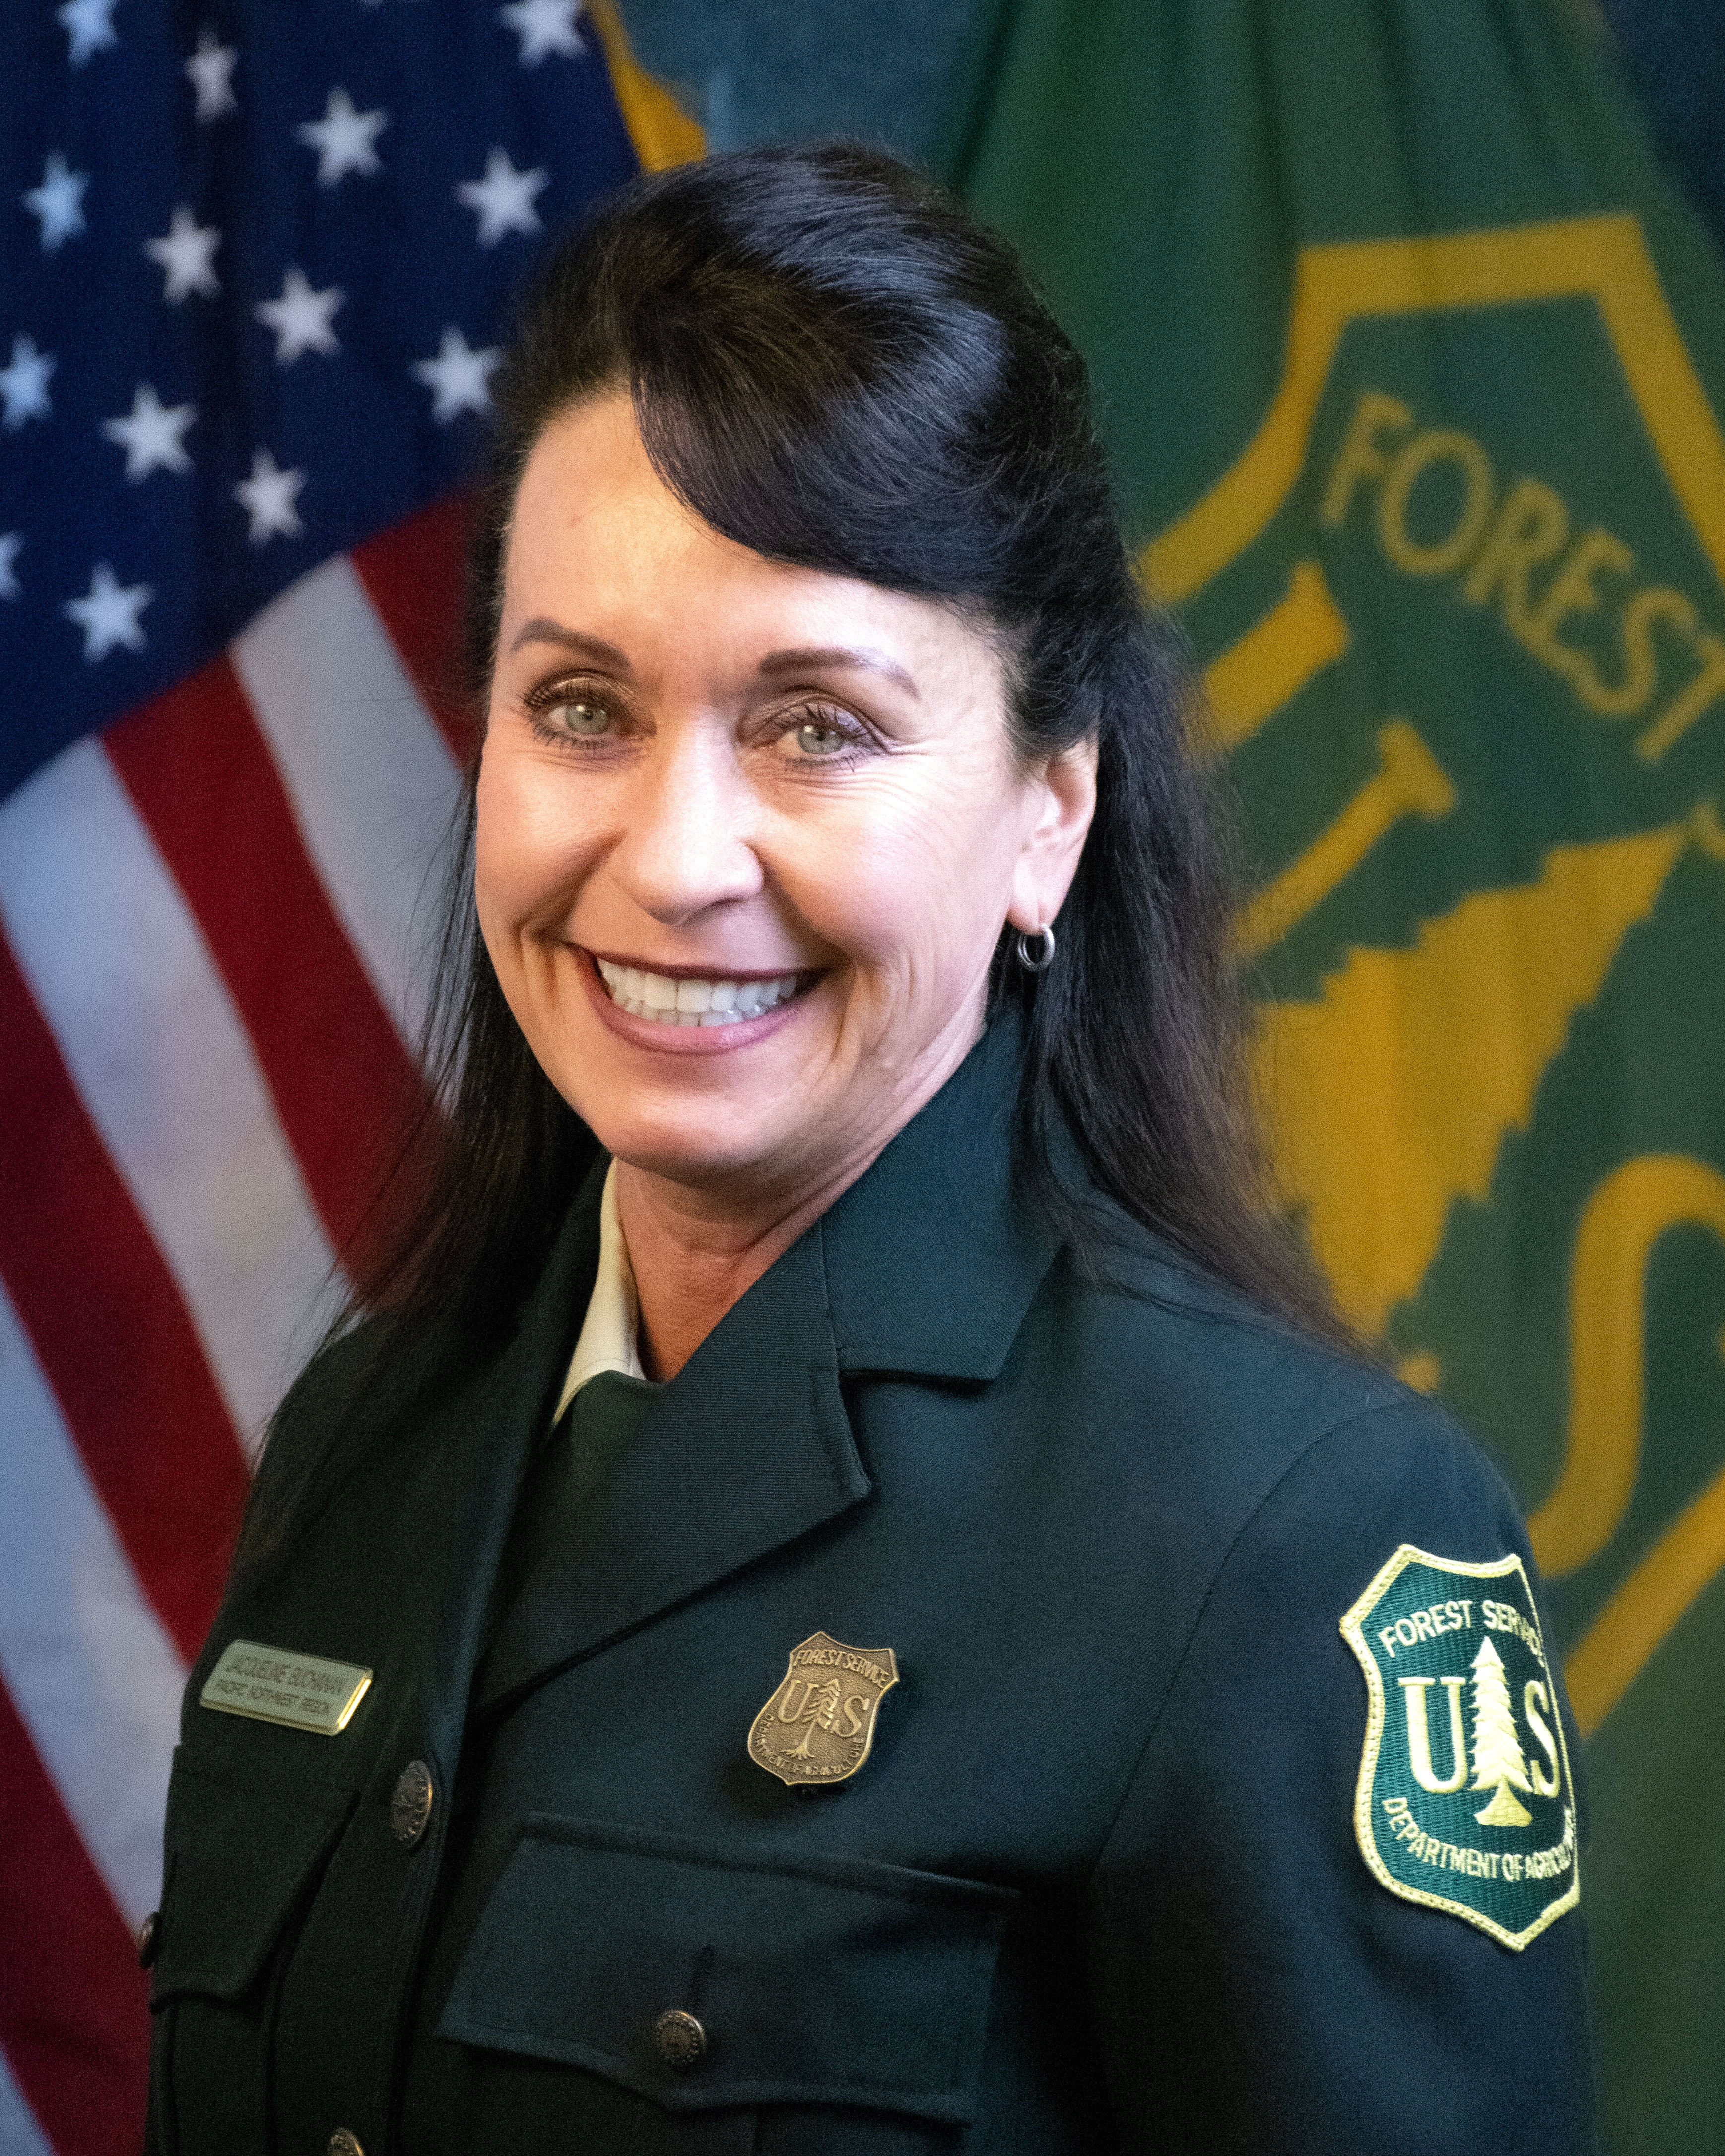 portrait showing a women in the forest service uniform with US and Forest service flags behind her.